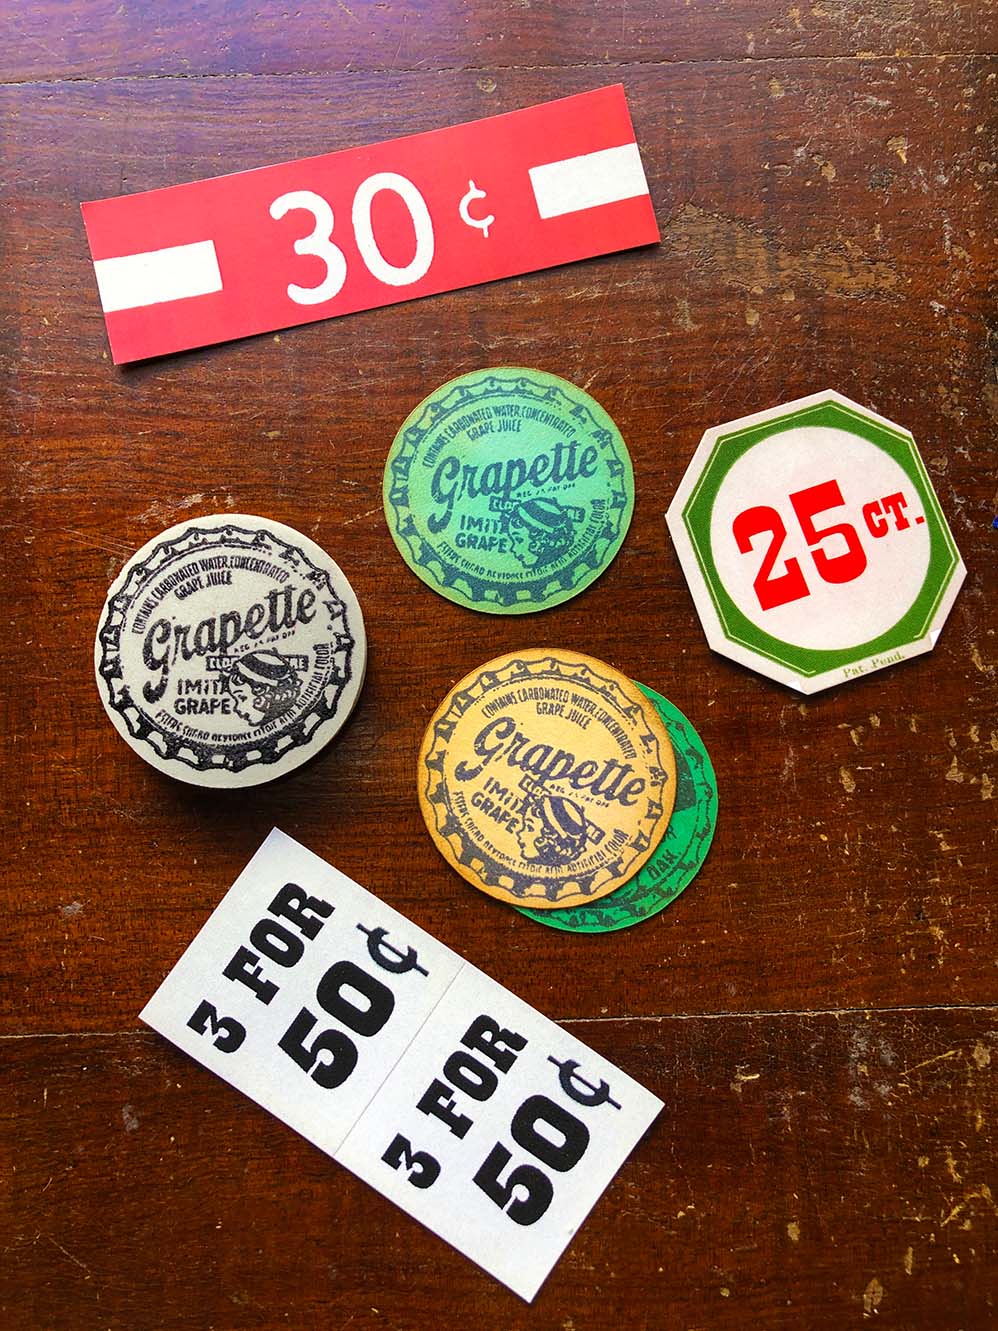 Grapette Soda Bottle Cap Rubber Stamp by Mic Moc (グレープソーダボトルキャップ) from micmoc.com